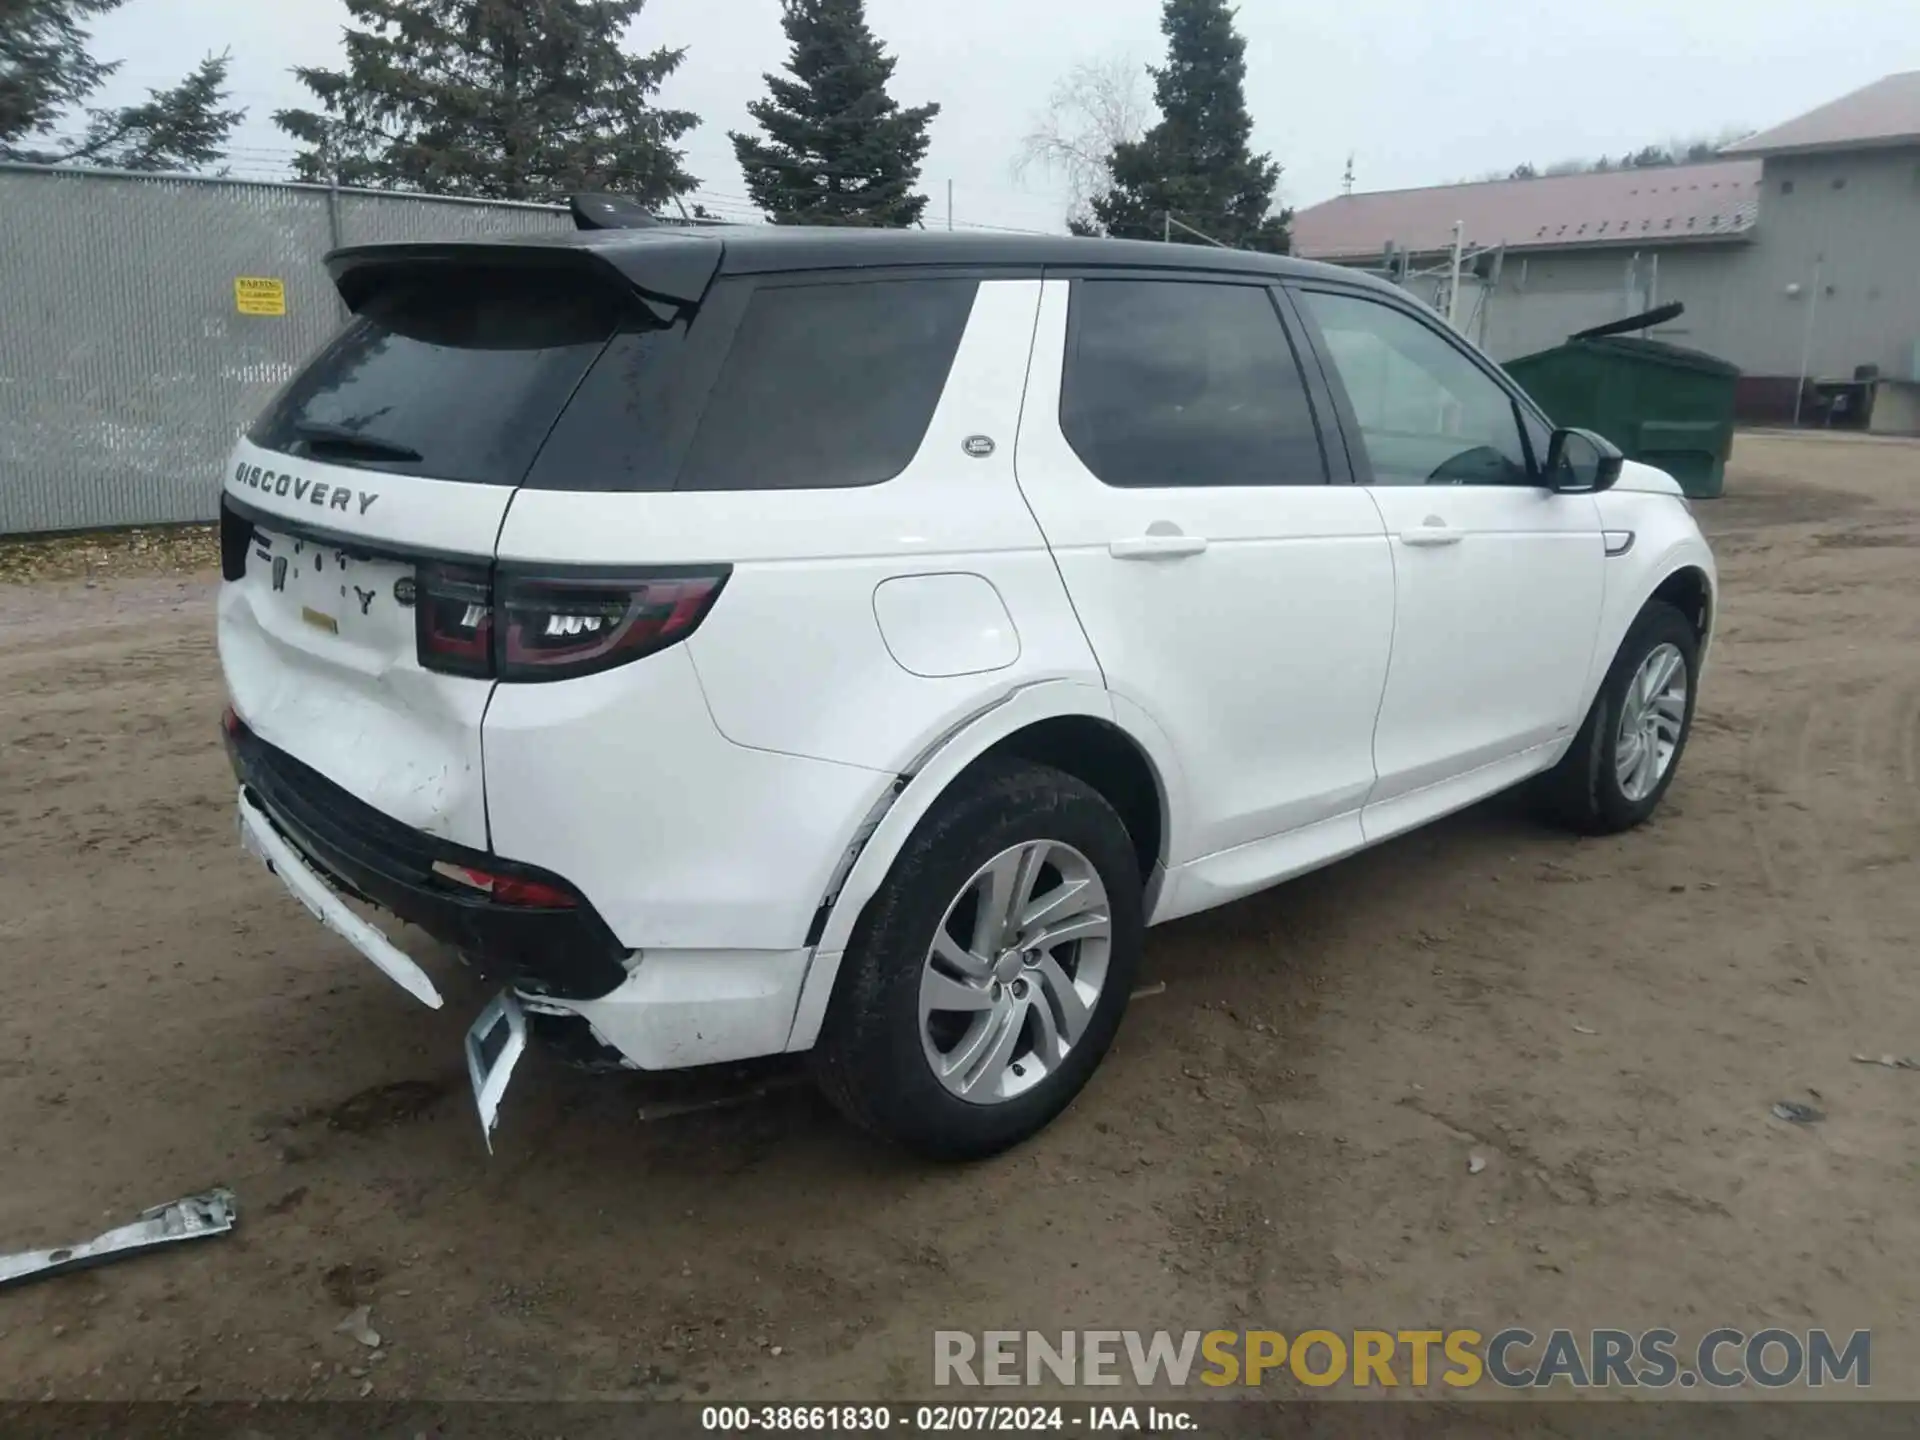 4 Photograph of a damaged car SALCT2FXXLH859485 LAND ROVER DISCOVERY SPORT 2020